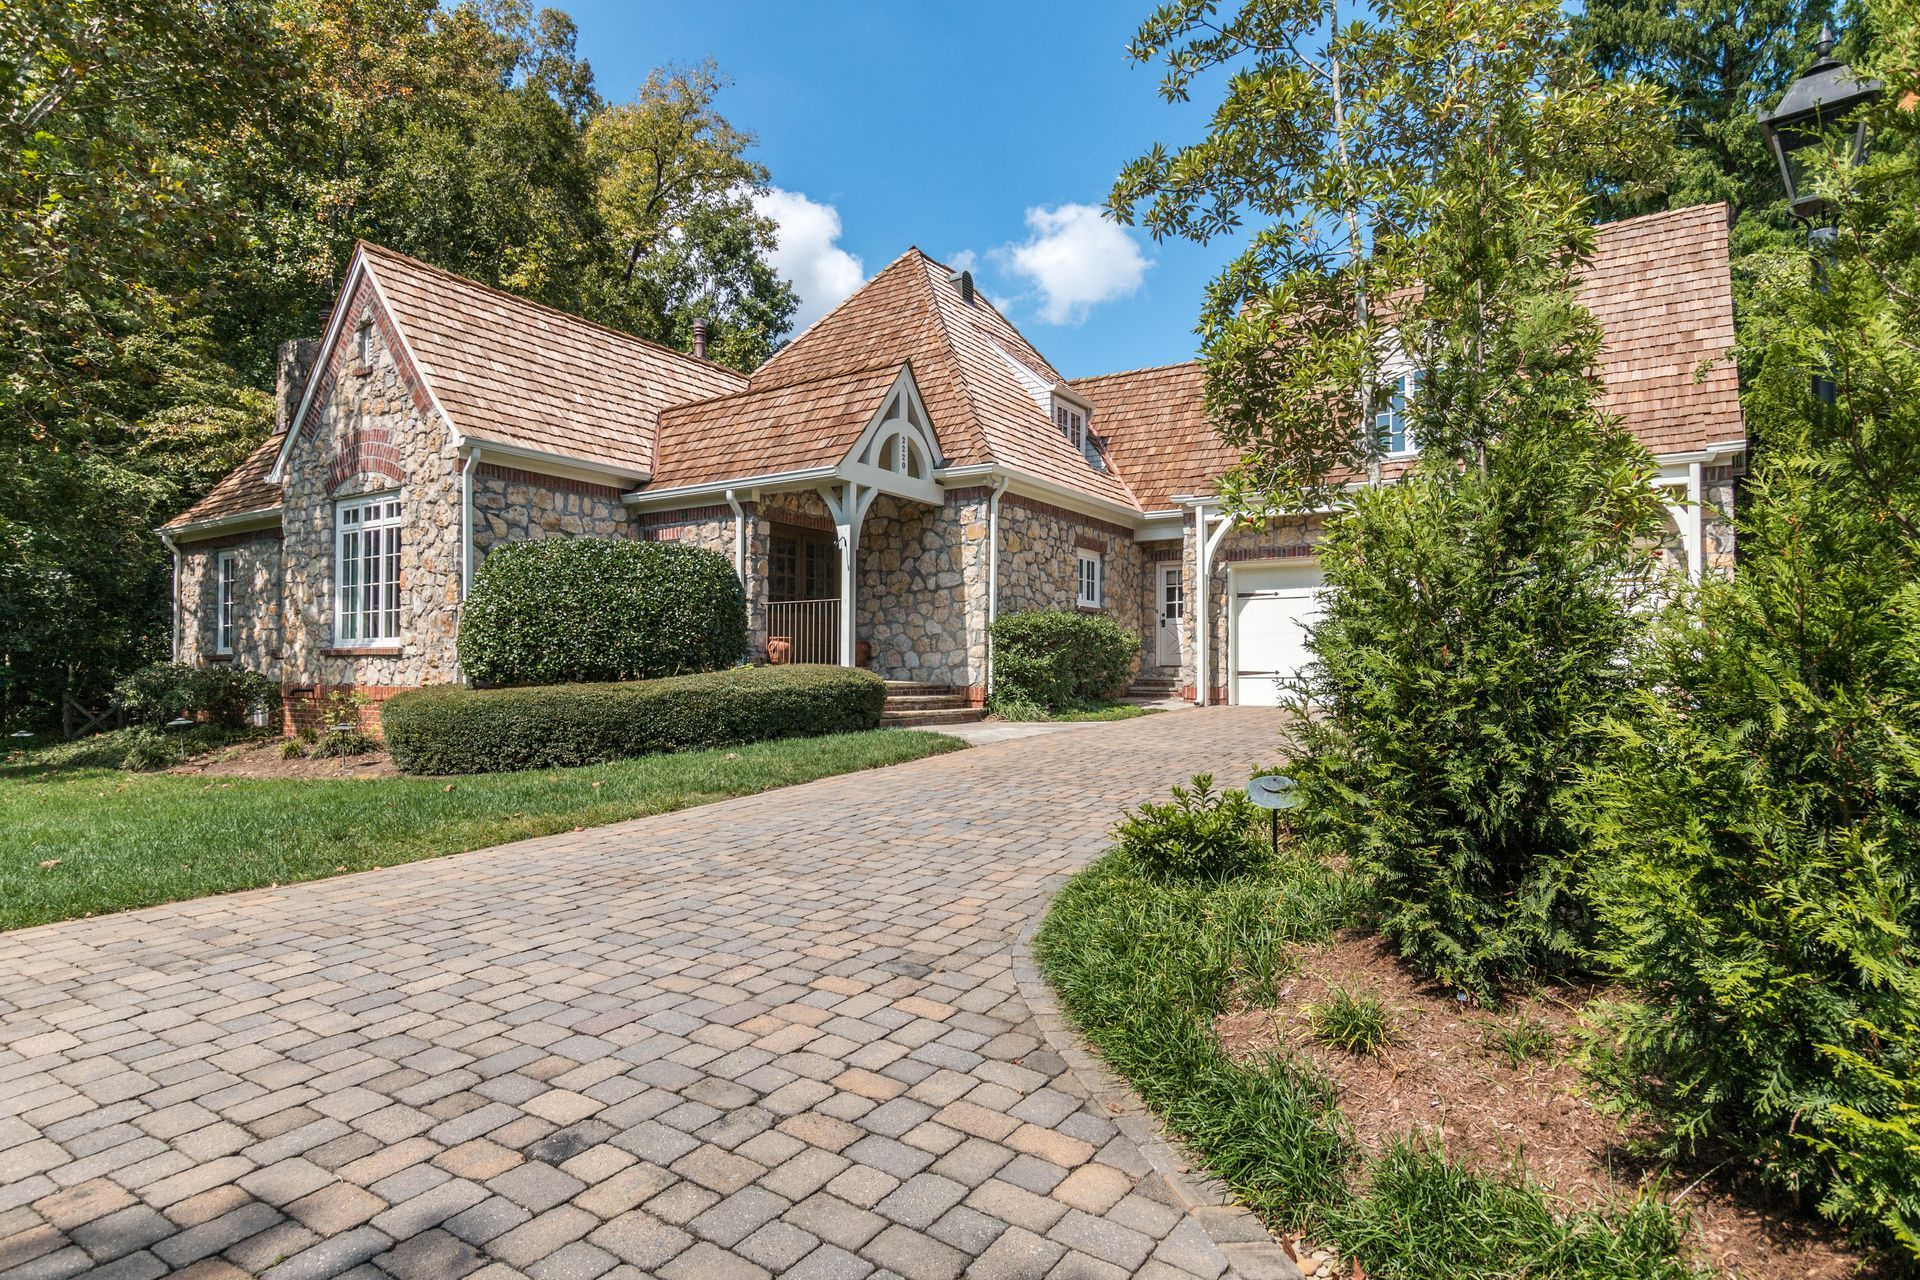 A large house with a brick driveway leading to it